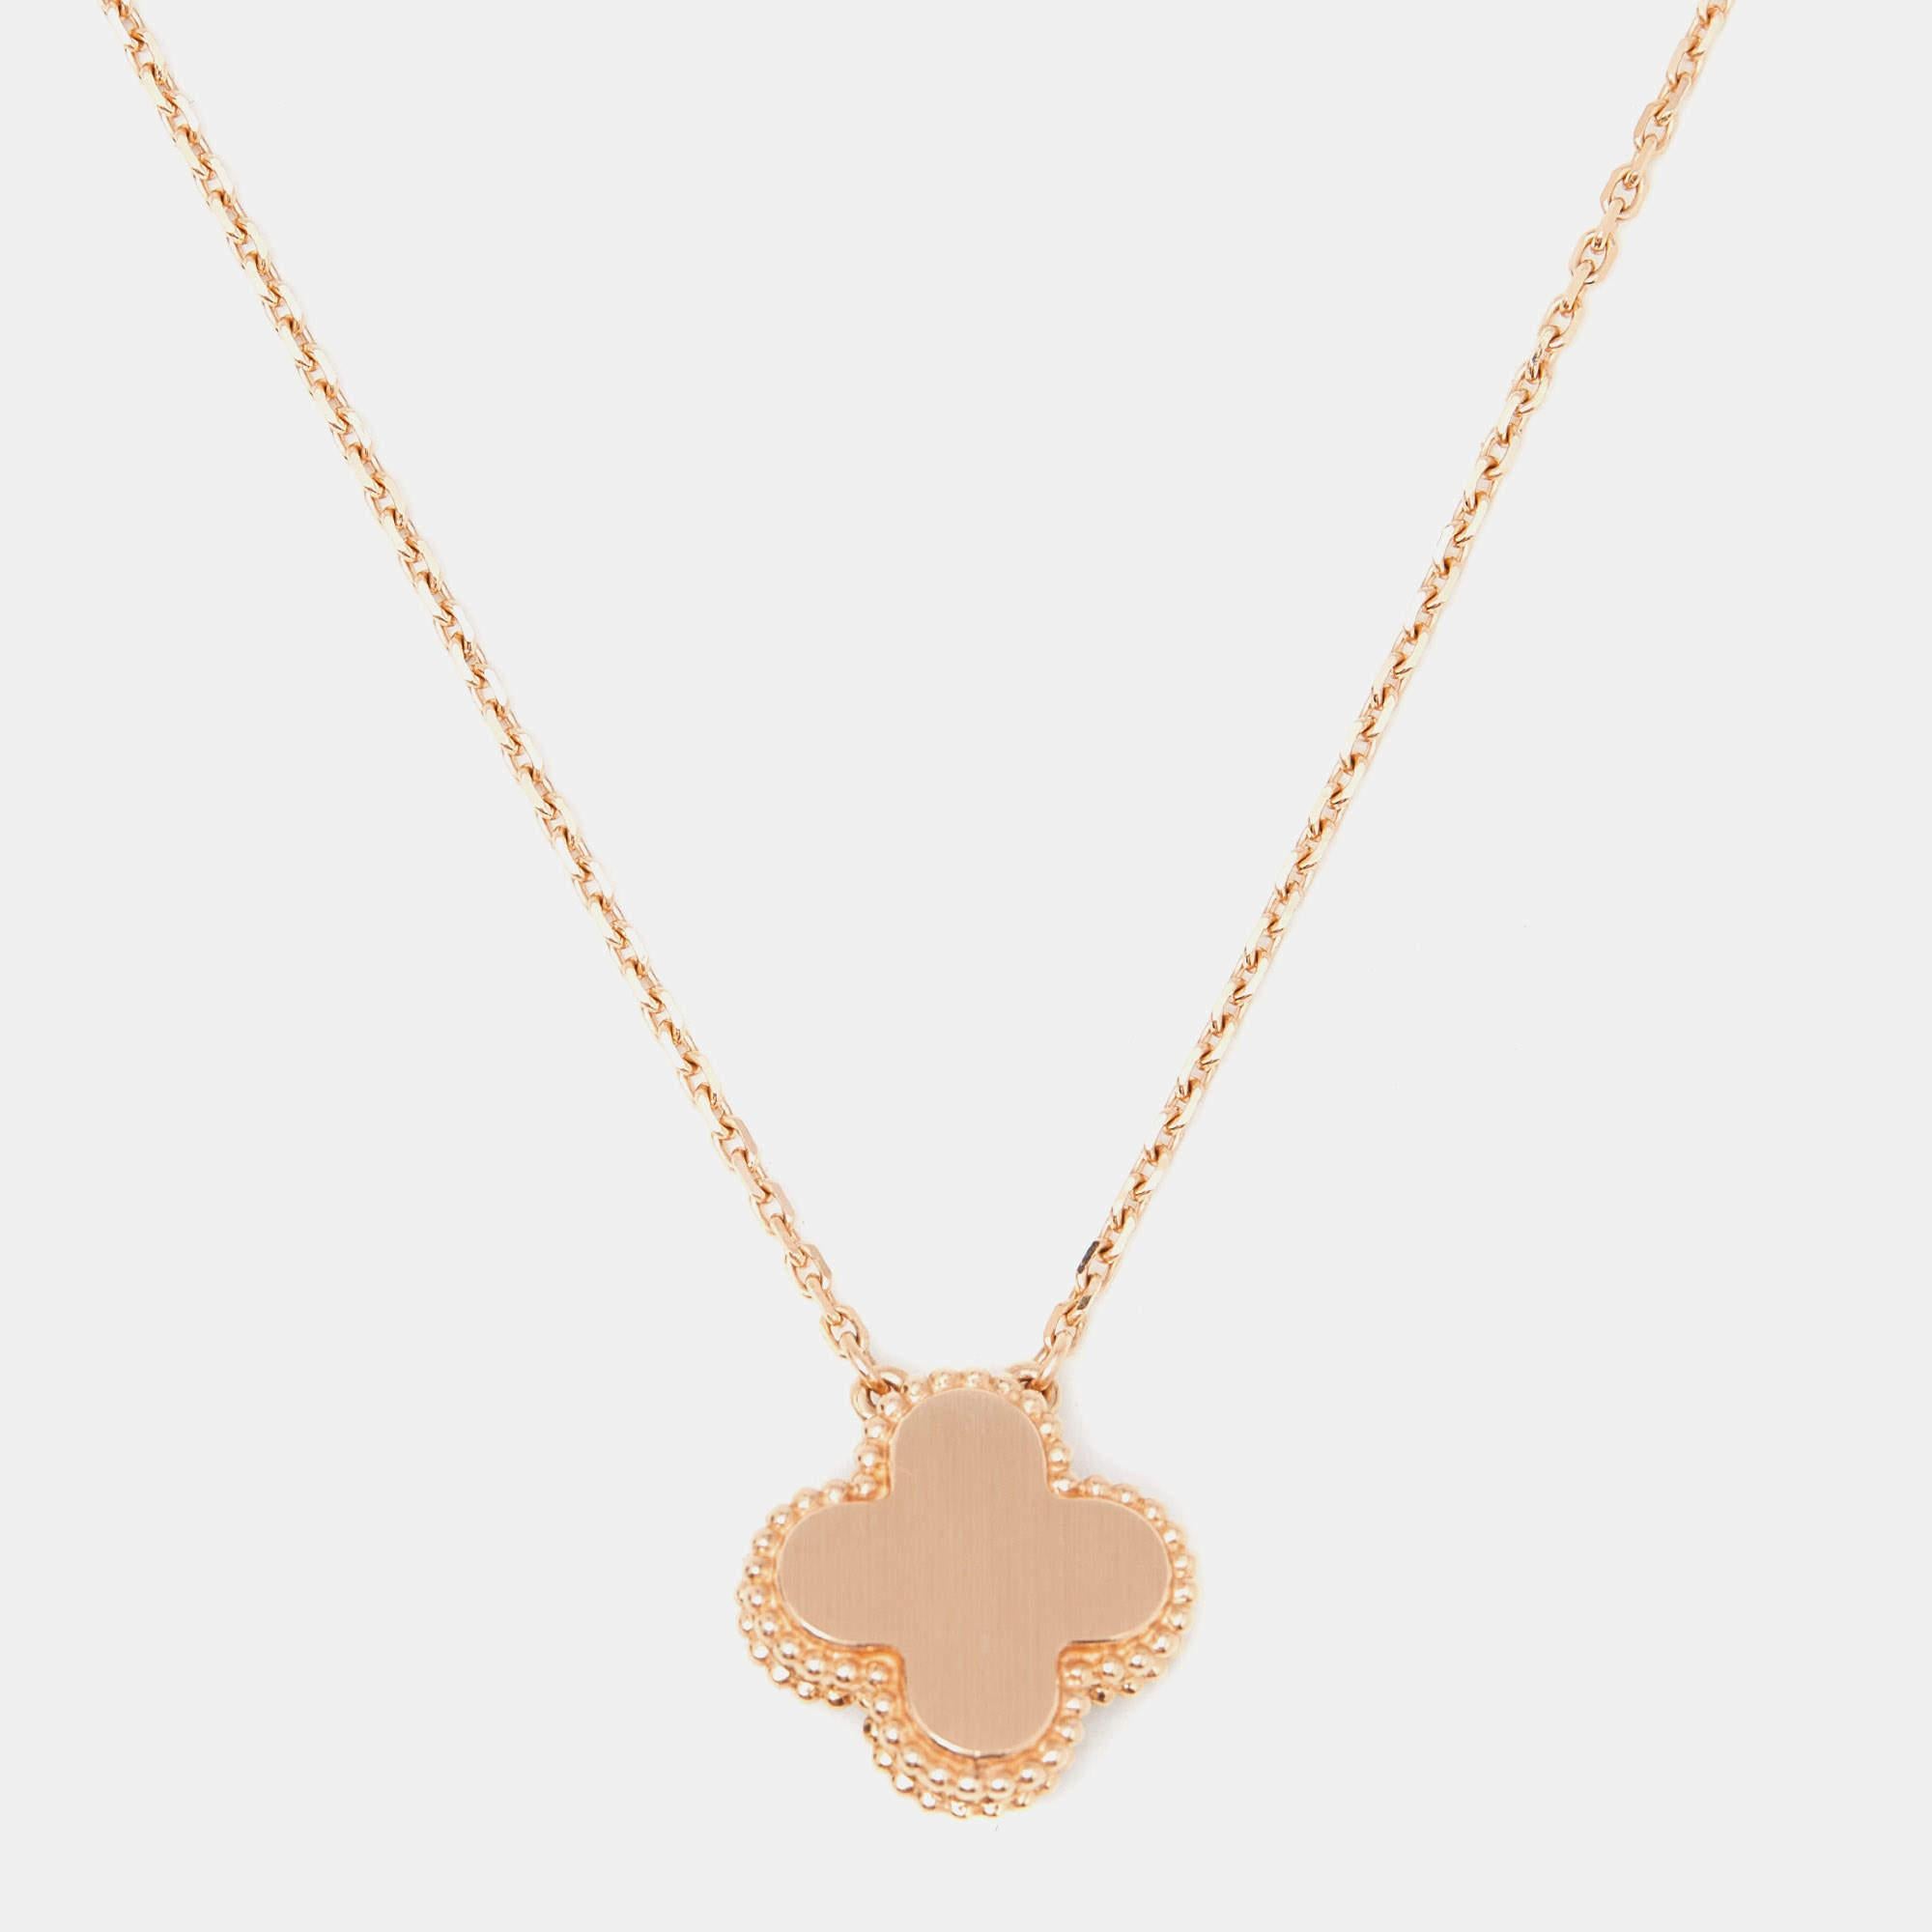 Invest in this opulent Van Cleef & Arpels 2023 Holiday pendant necklace from their iconic Vintage Alhambra collection. The 18k rose gold Alhambra pendant is set with a single diamond and obsidian inlay. A sweet mix of minimalist style and timeless